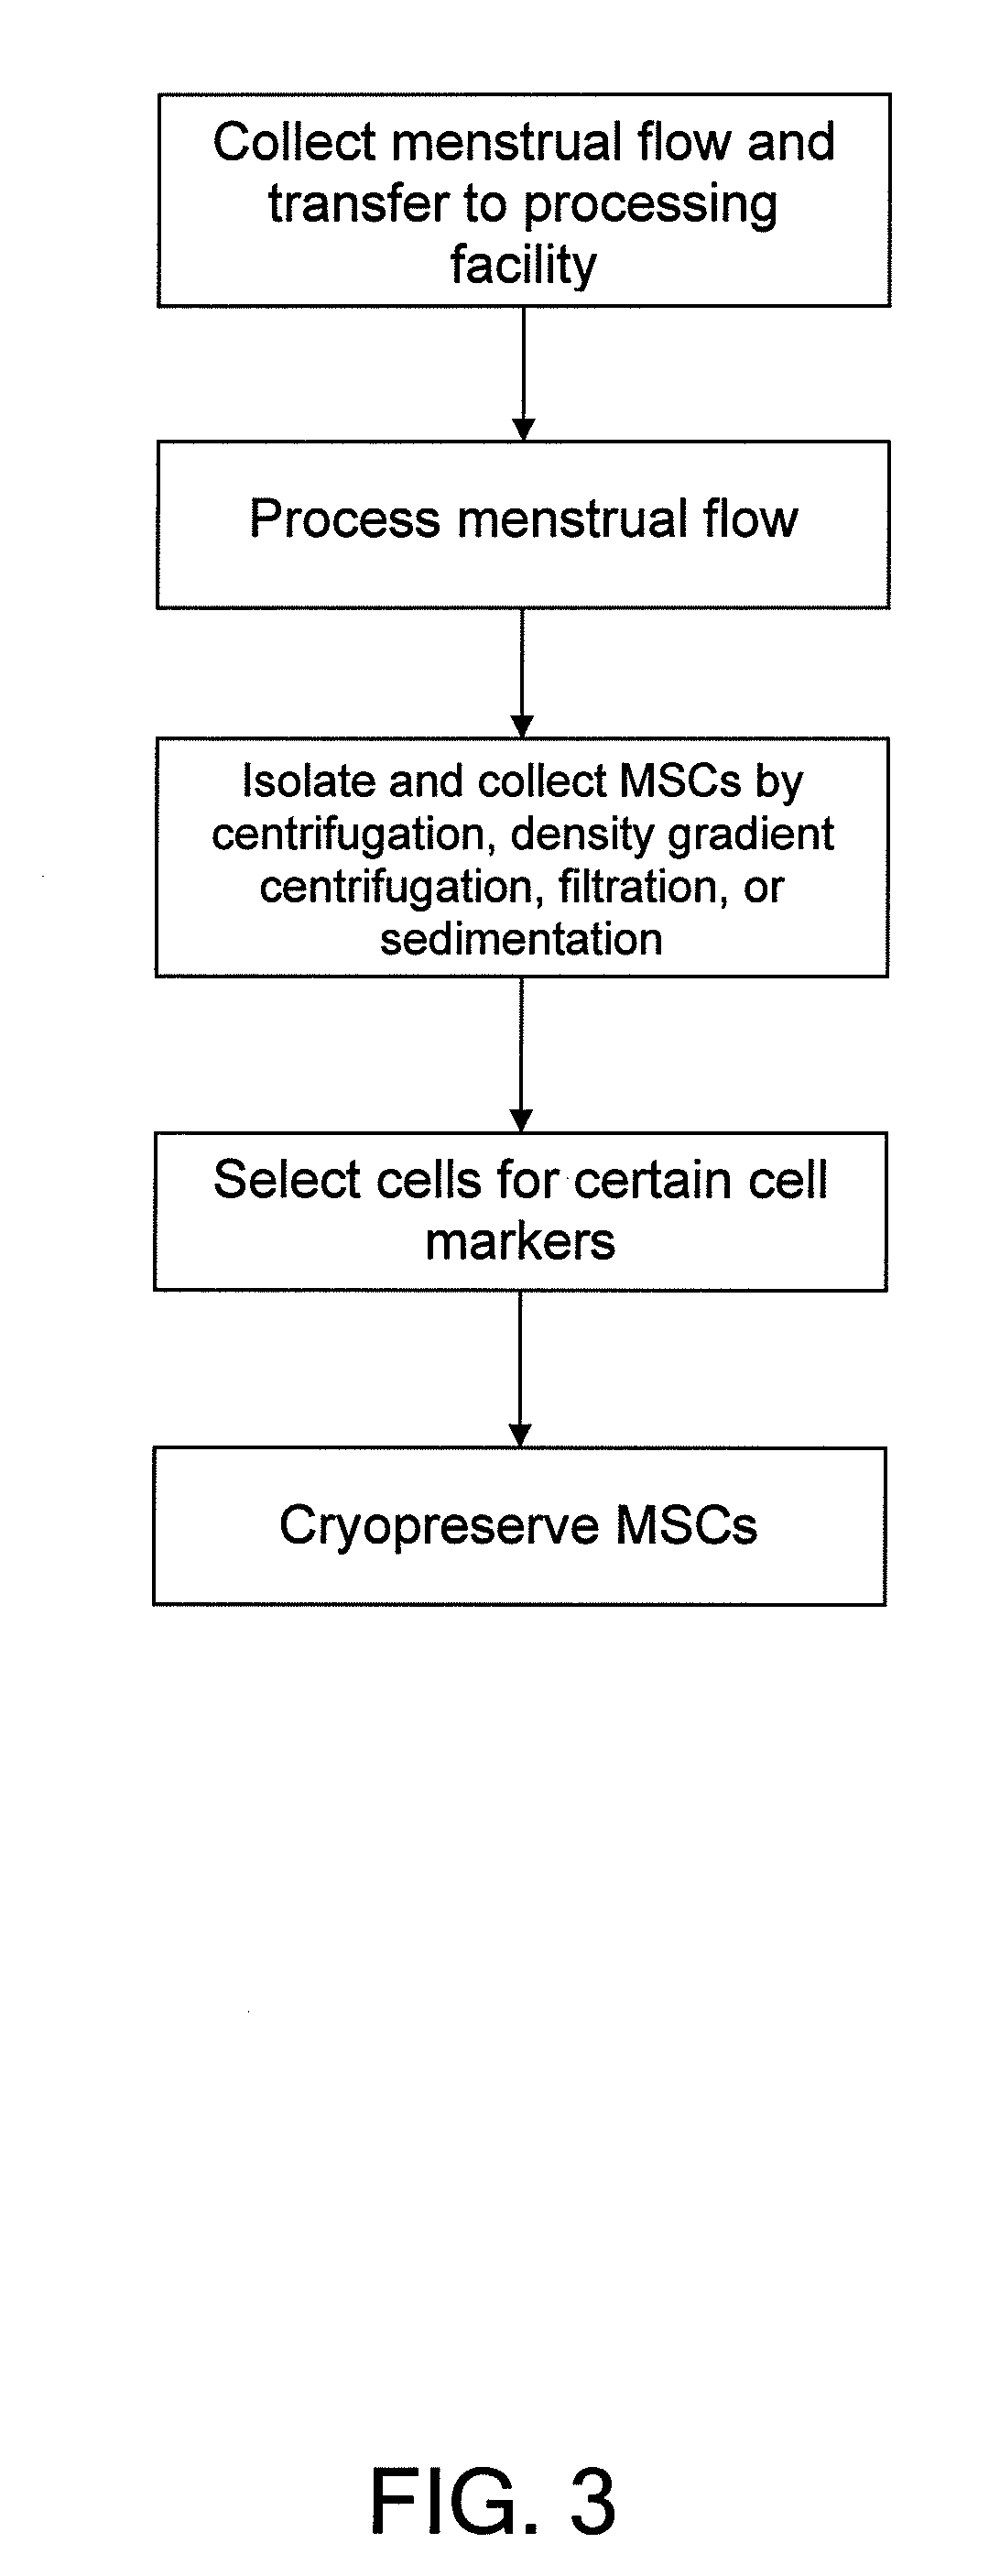 Procurement, Isolation, and Cryopreservation of Endometrial/Menstrual Cells